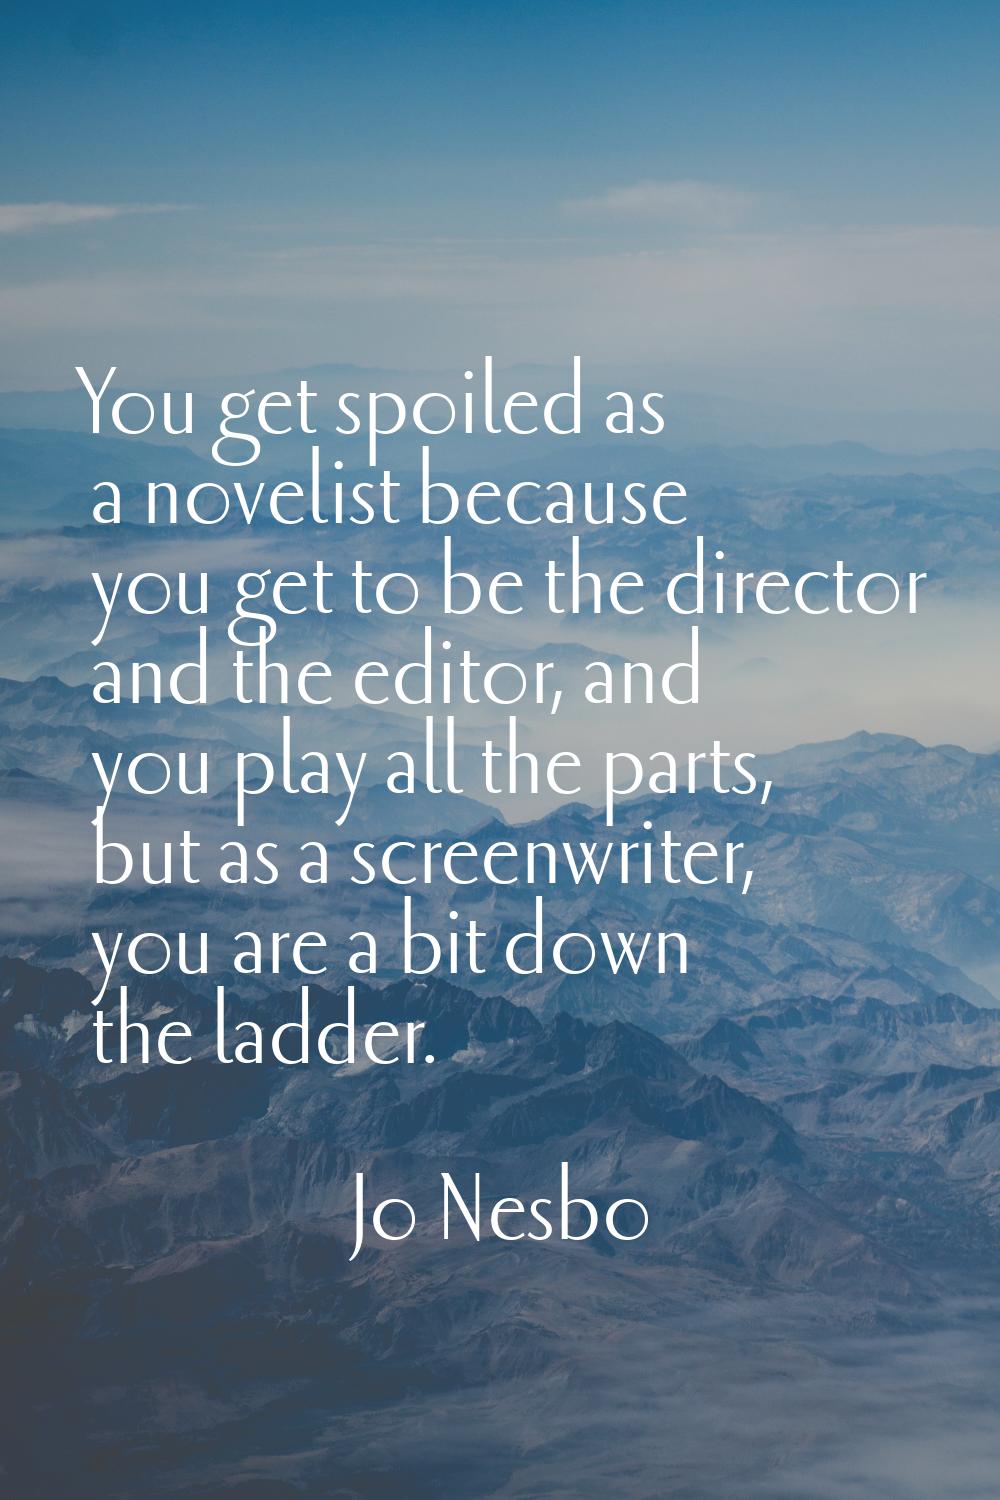 You get spoiled as a novelist because you get to be the director and the editor, and you play all t